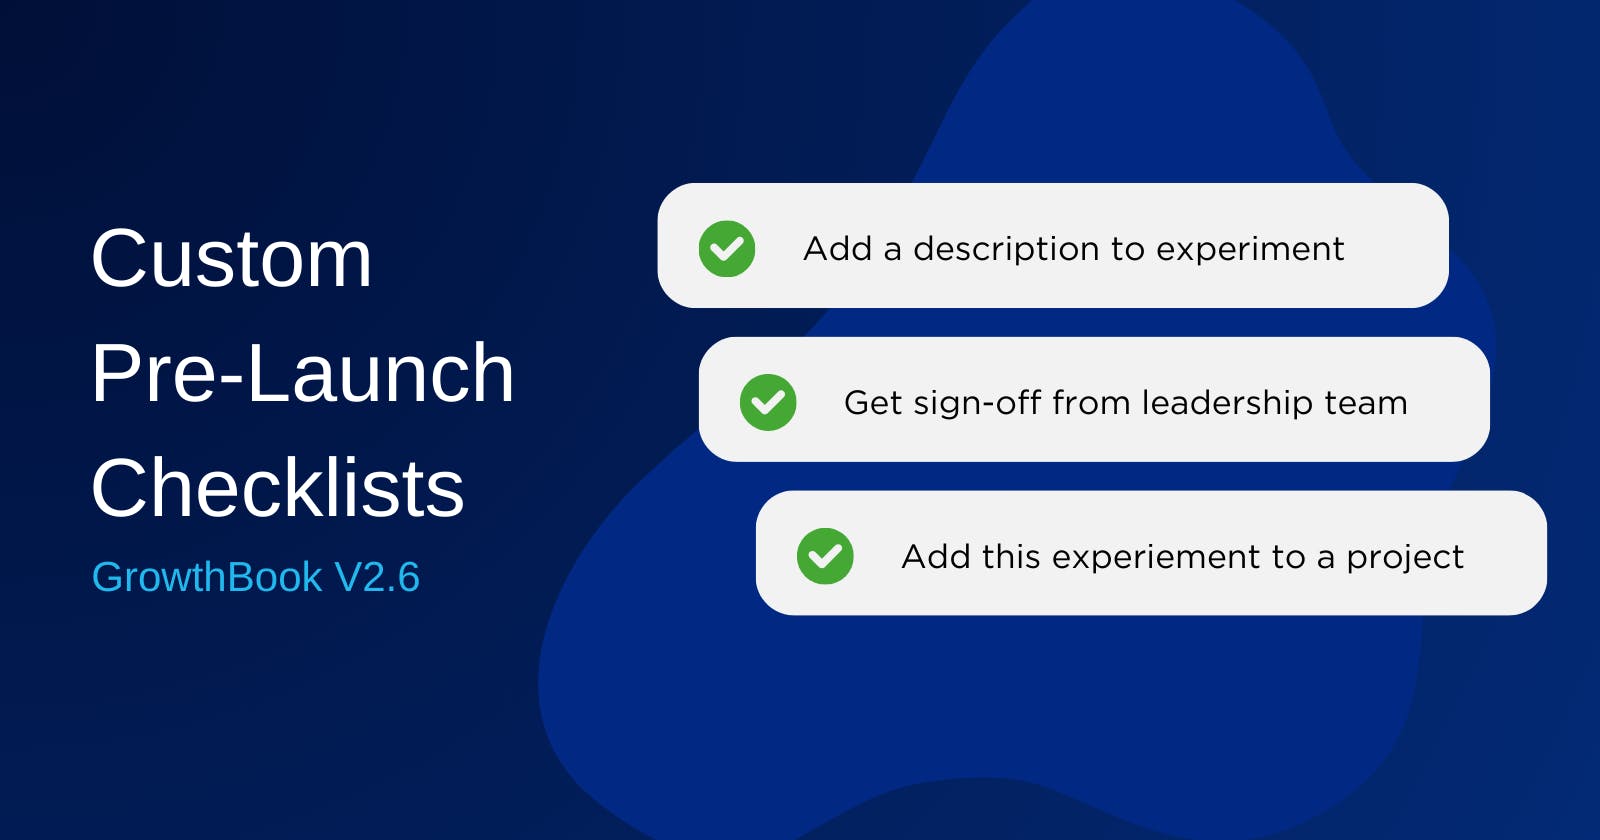 Boost Confidence in Experiment Launches with GrowthBook's Pre-Launch Checklists